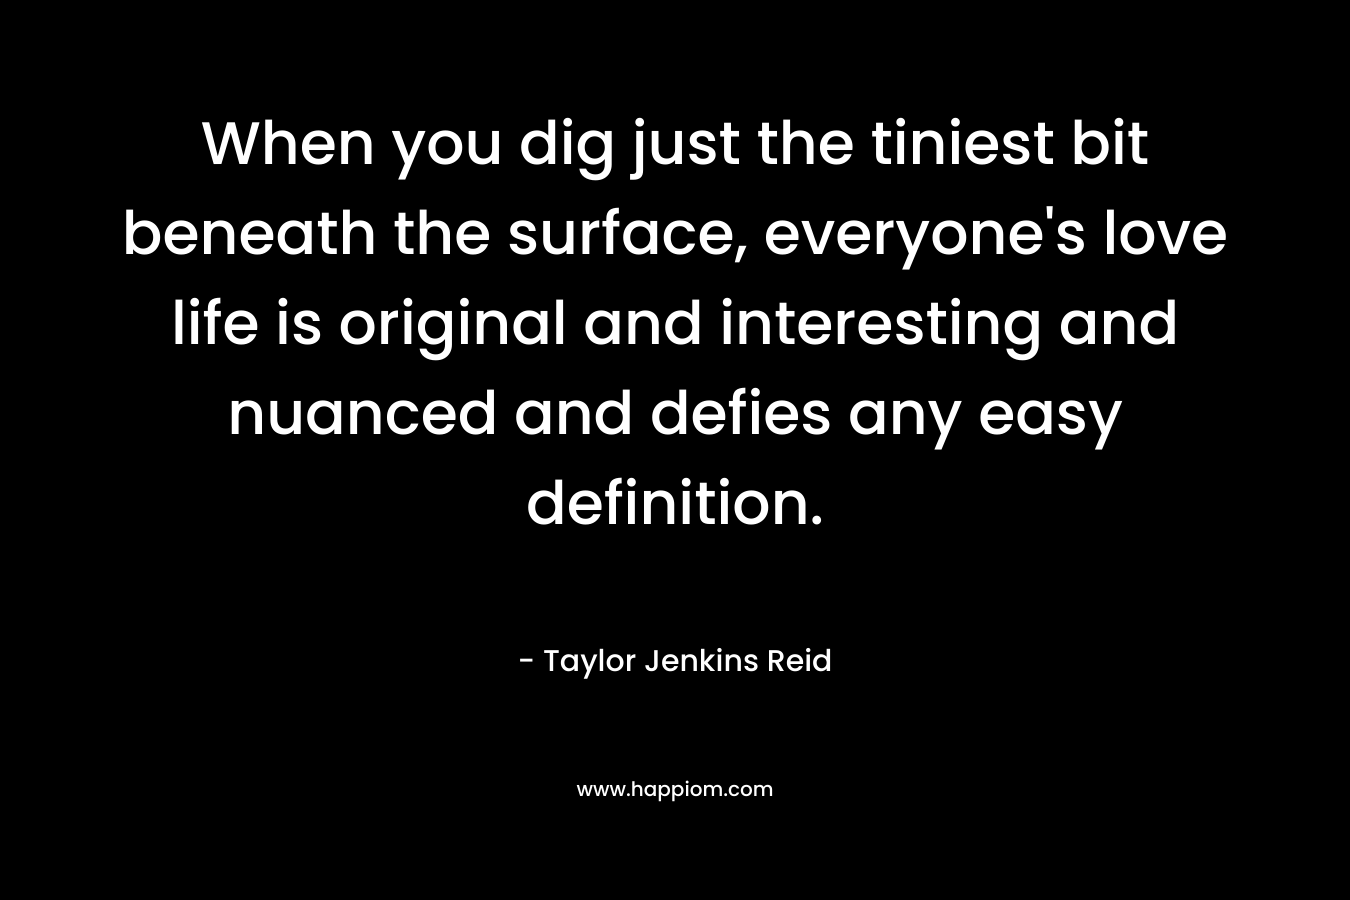 When you dig just the tiniest bit beneath the surface, everyone’s love life is original and interesting and nuanced and defies any easy definition. – Taylor Jenkins Reid